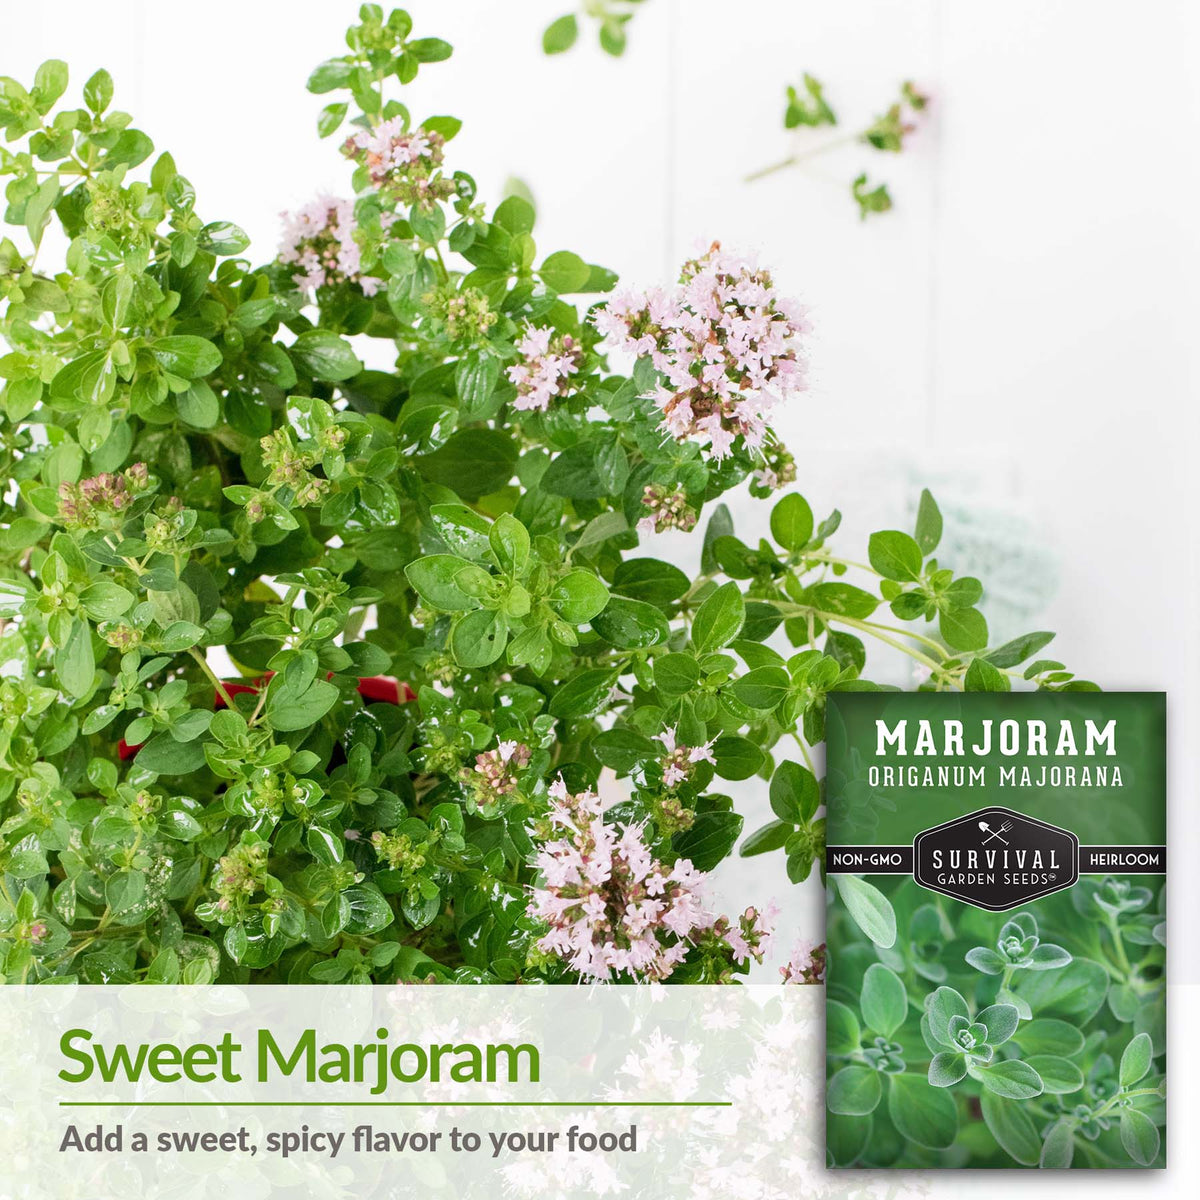 Add a sweet and spicy flavor to your food with Marjoram